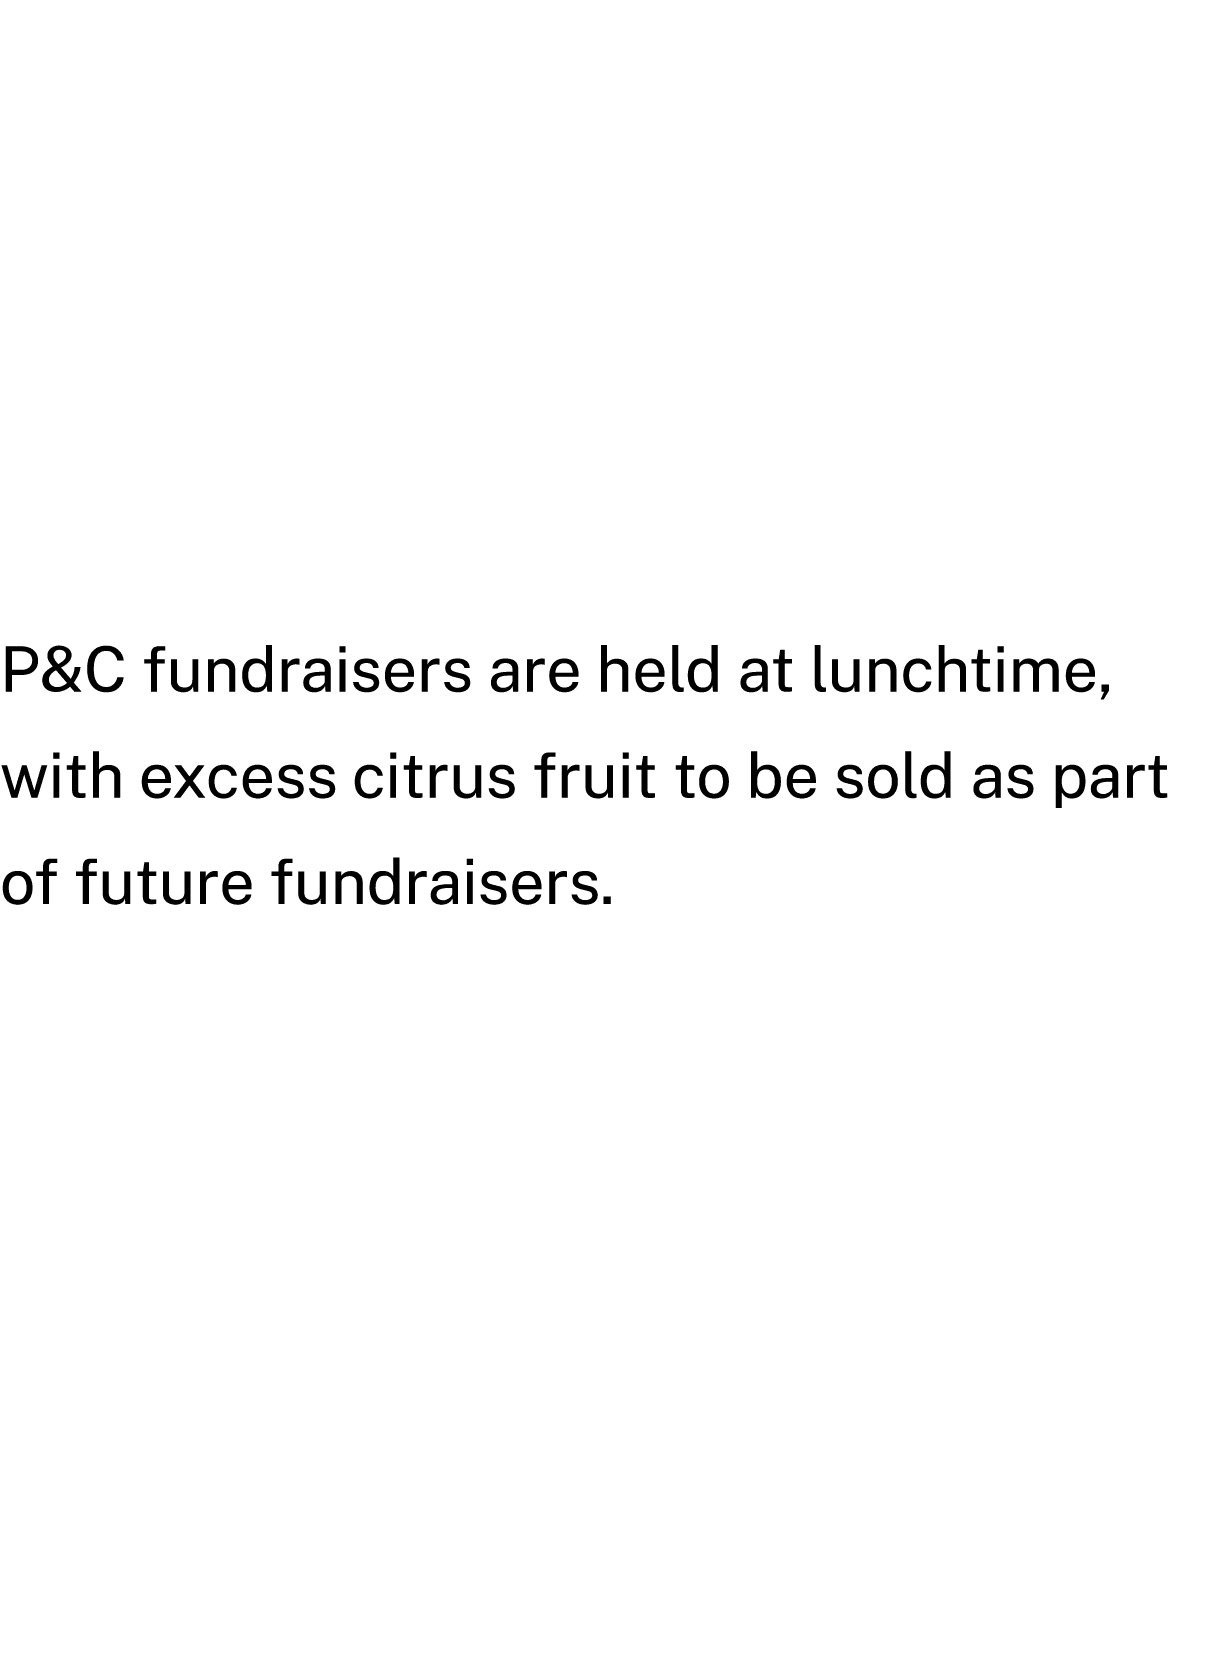 P&C fundraisers are held at lunchtime, with excess citrus fruit to be sold as part of future fundraisers. 